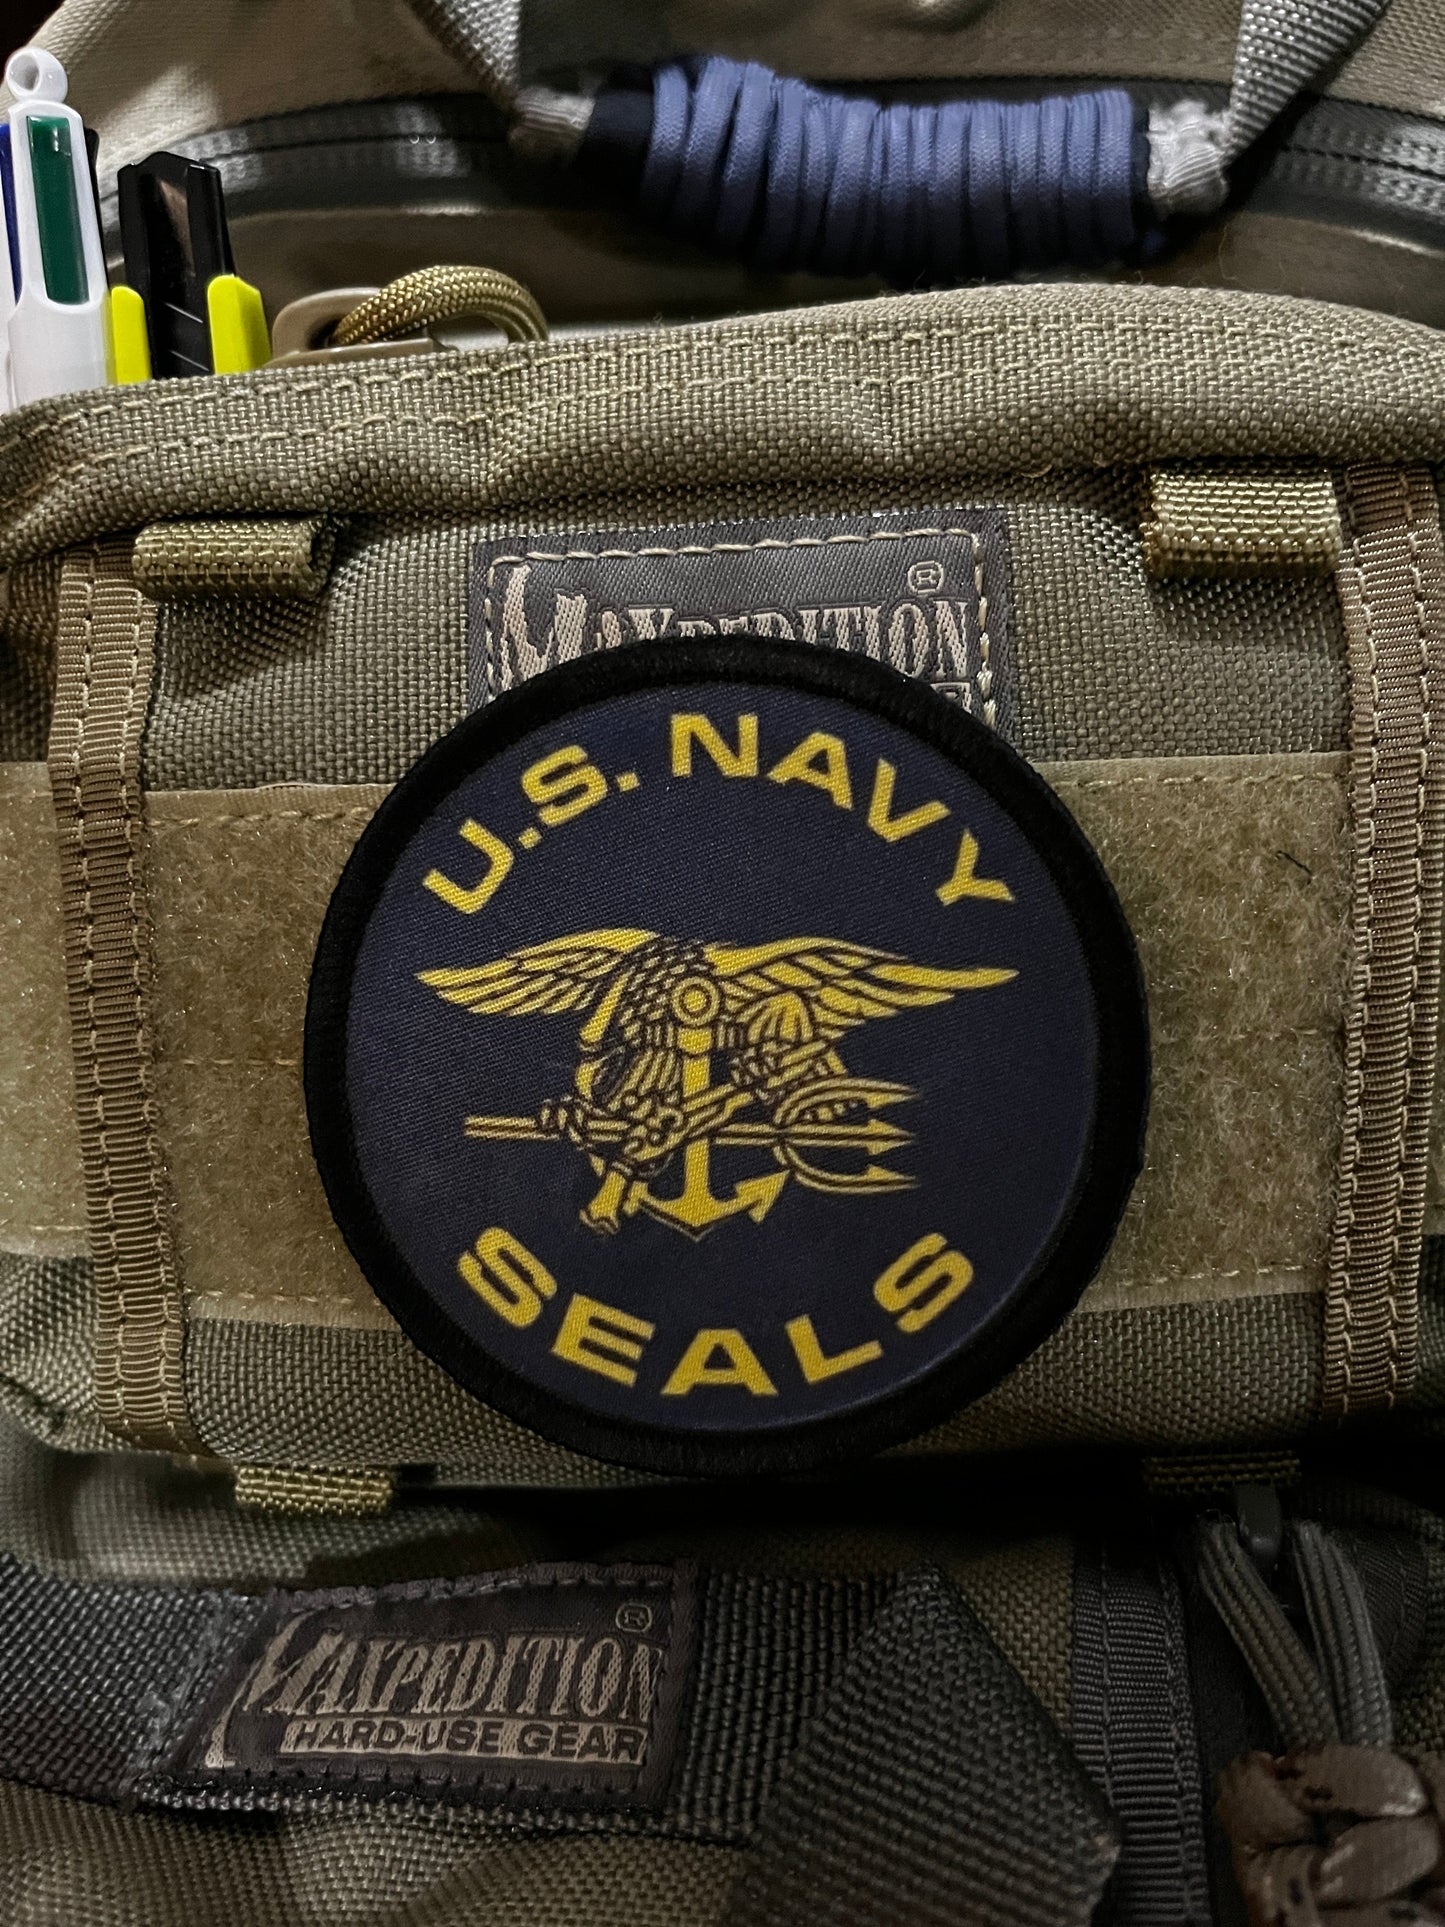 3" U.S Navy Seals Morale Patch Morale Patches Redheaded T Shirts 